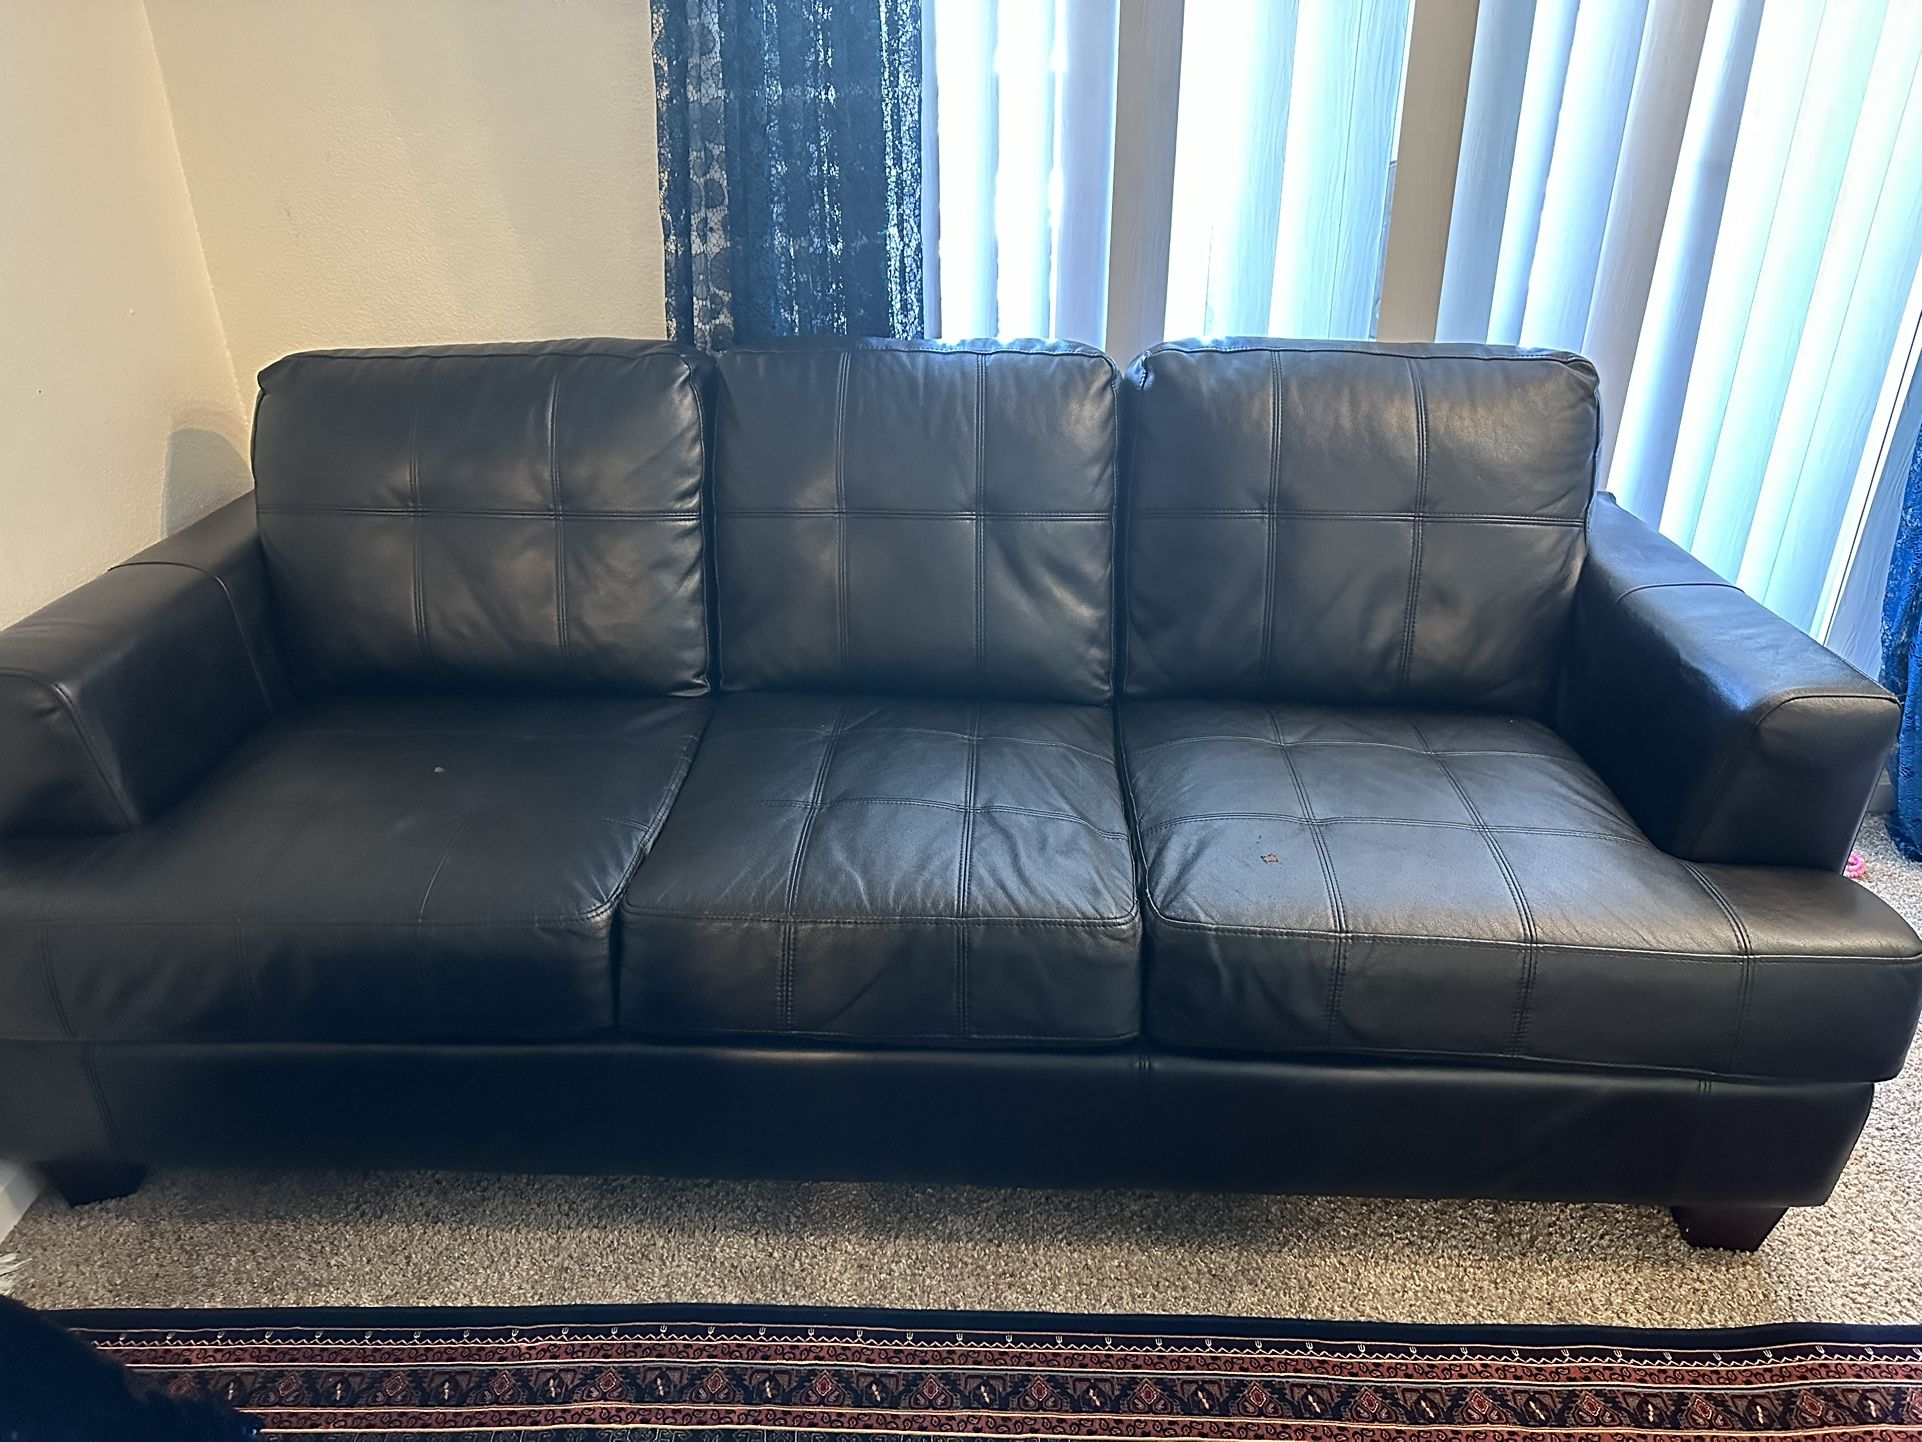 Two Set Of Couches Black Color With Two Coffee Table In Two Size